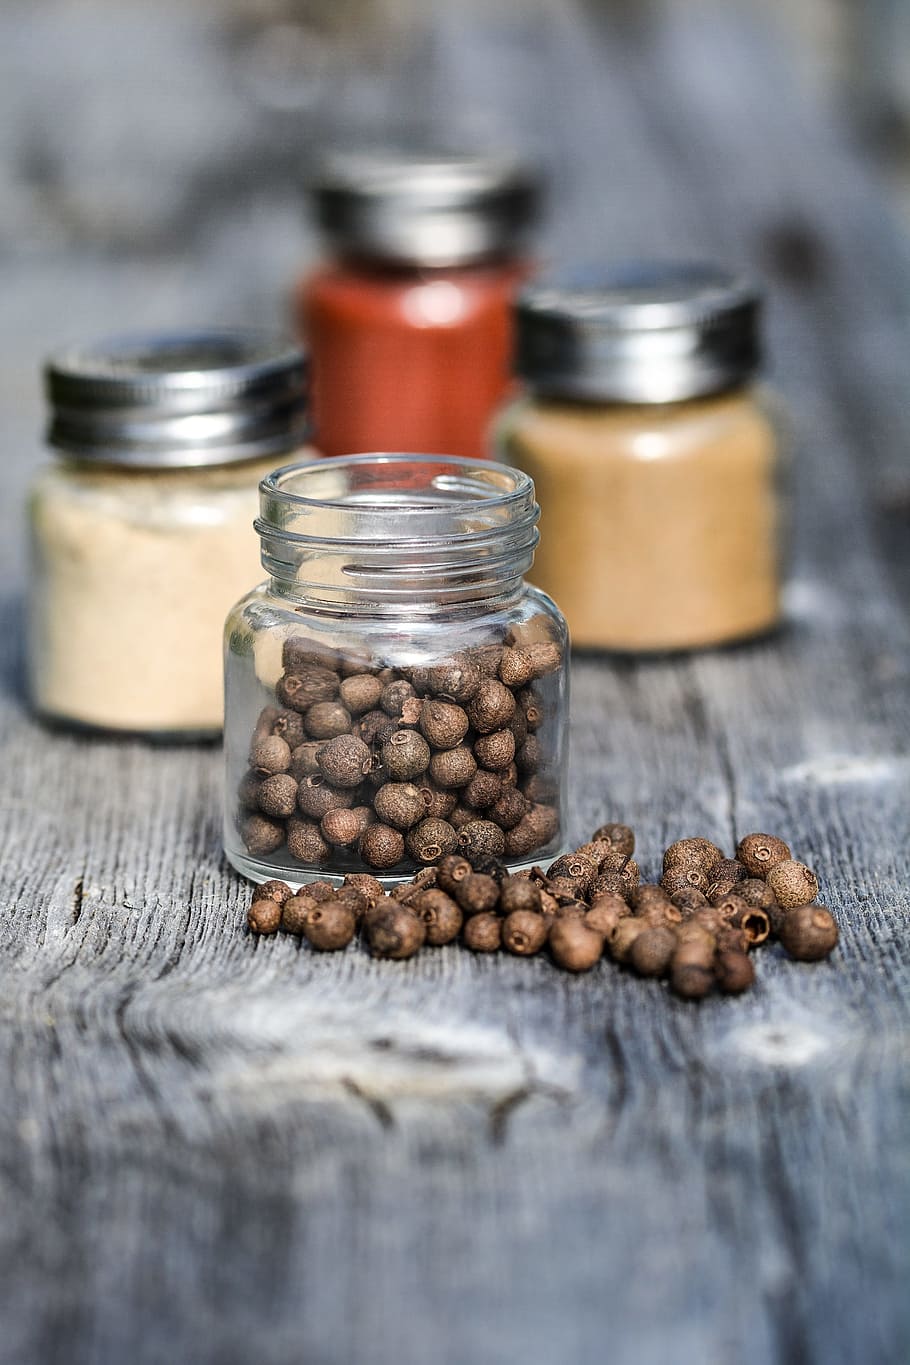 brown, nuts, clear, glass jar, spices, jar, kitchen, cooking, wooden, pepper